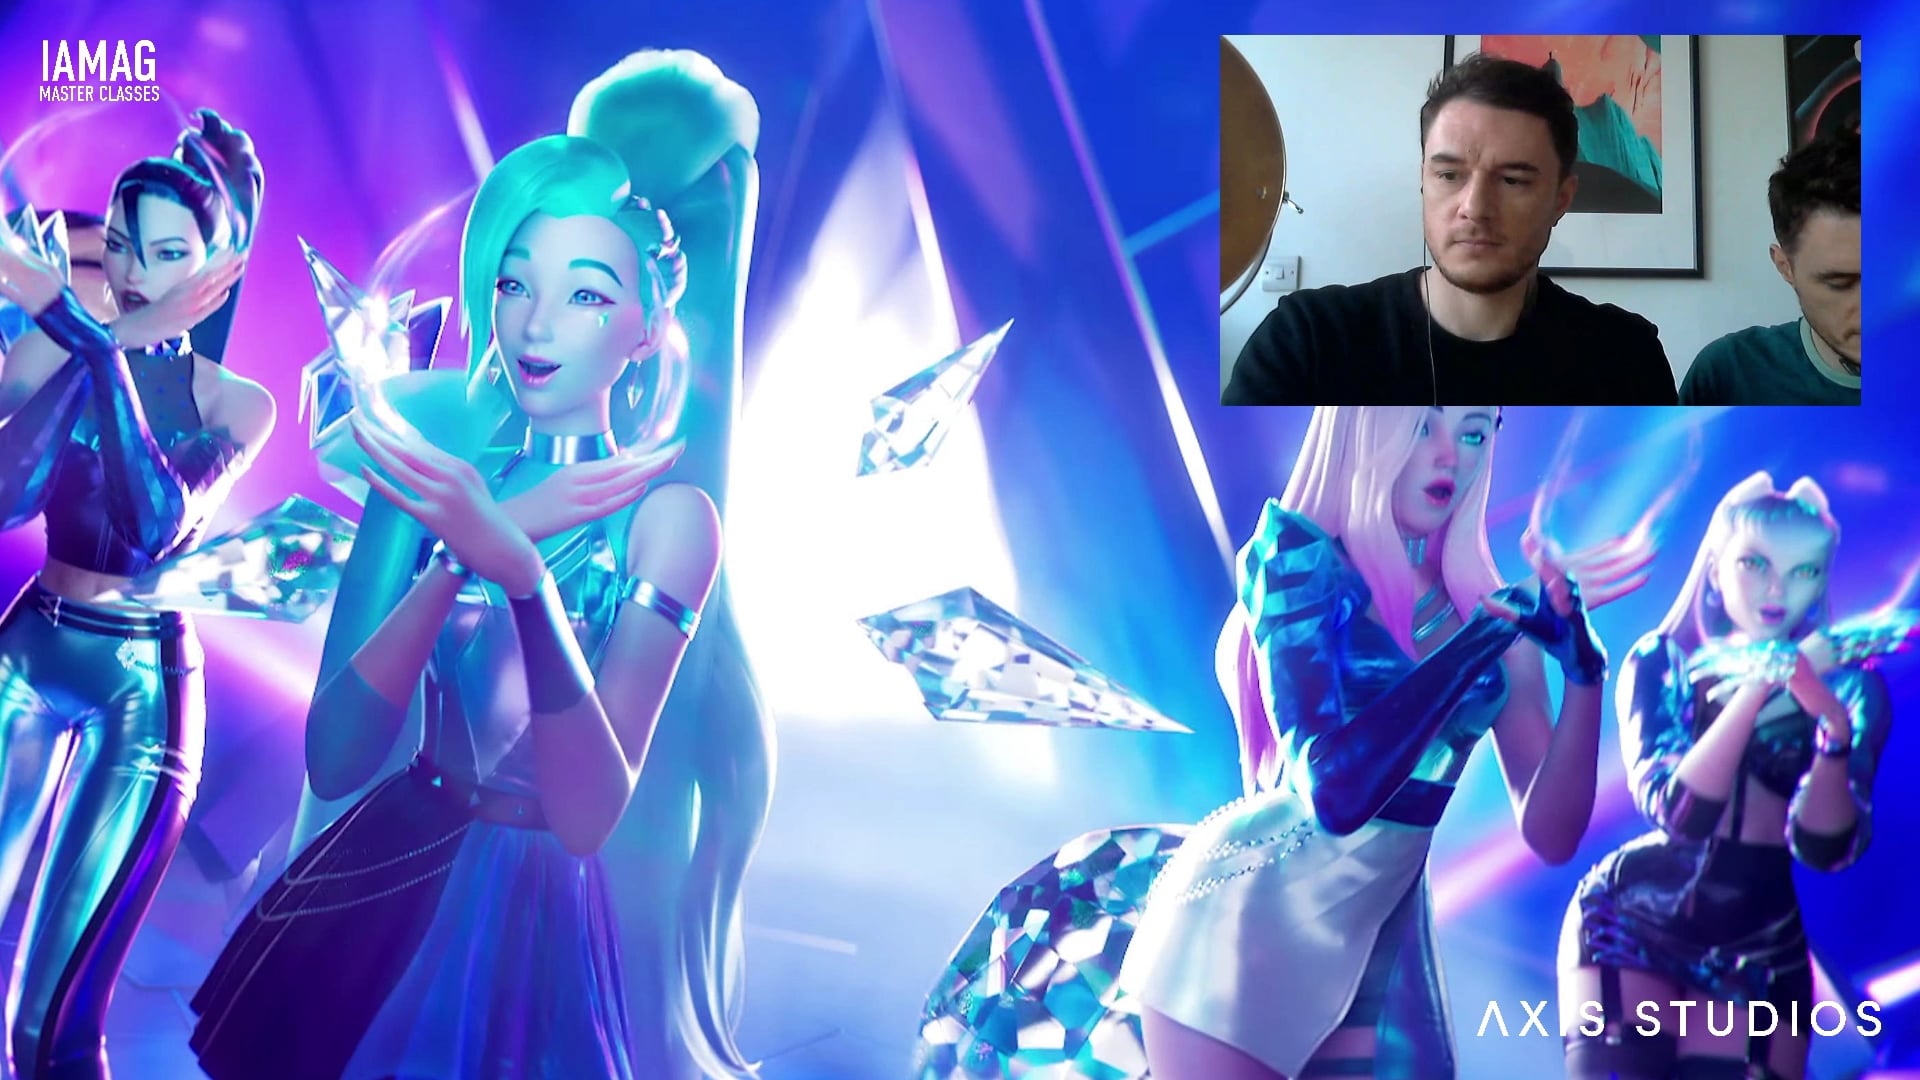 Making Of K/DA More by Axis Studios | IAMAG Master Classes